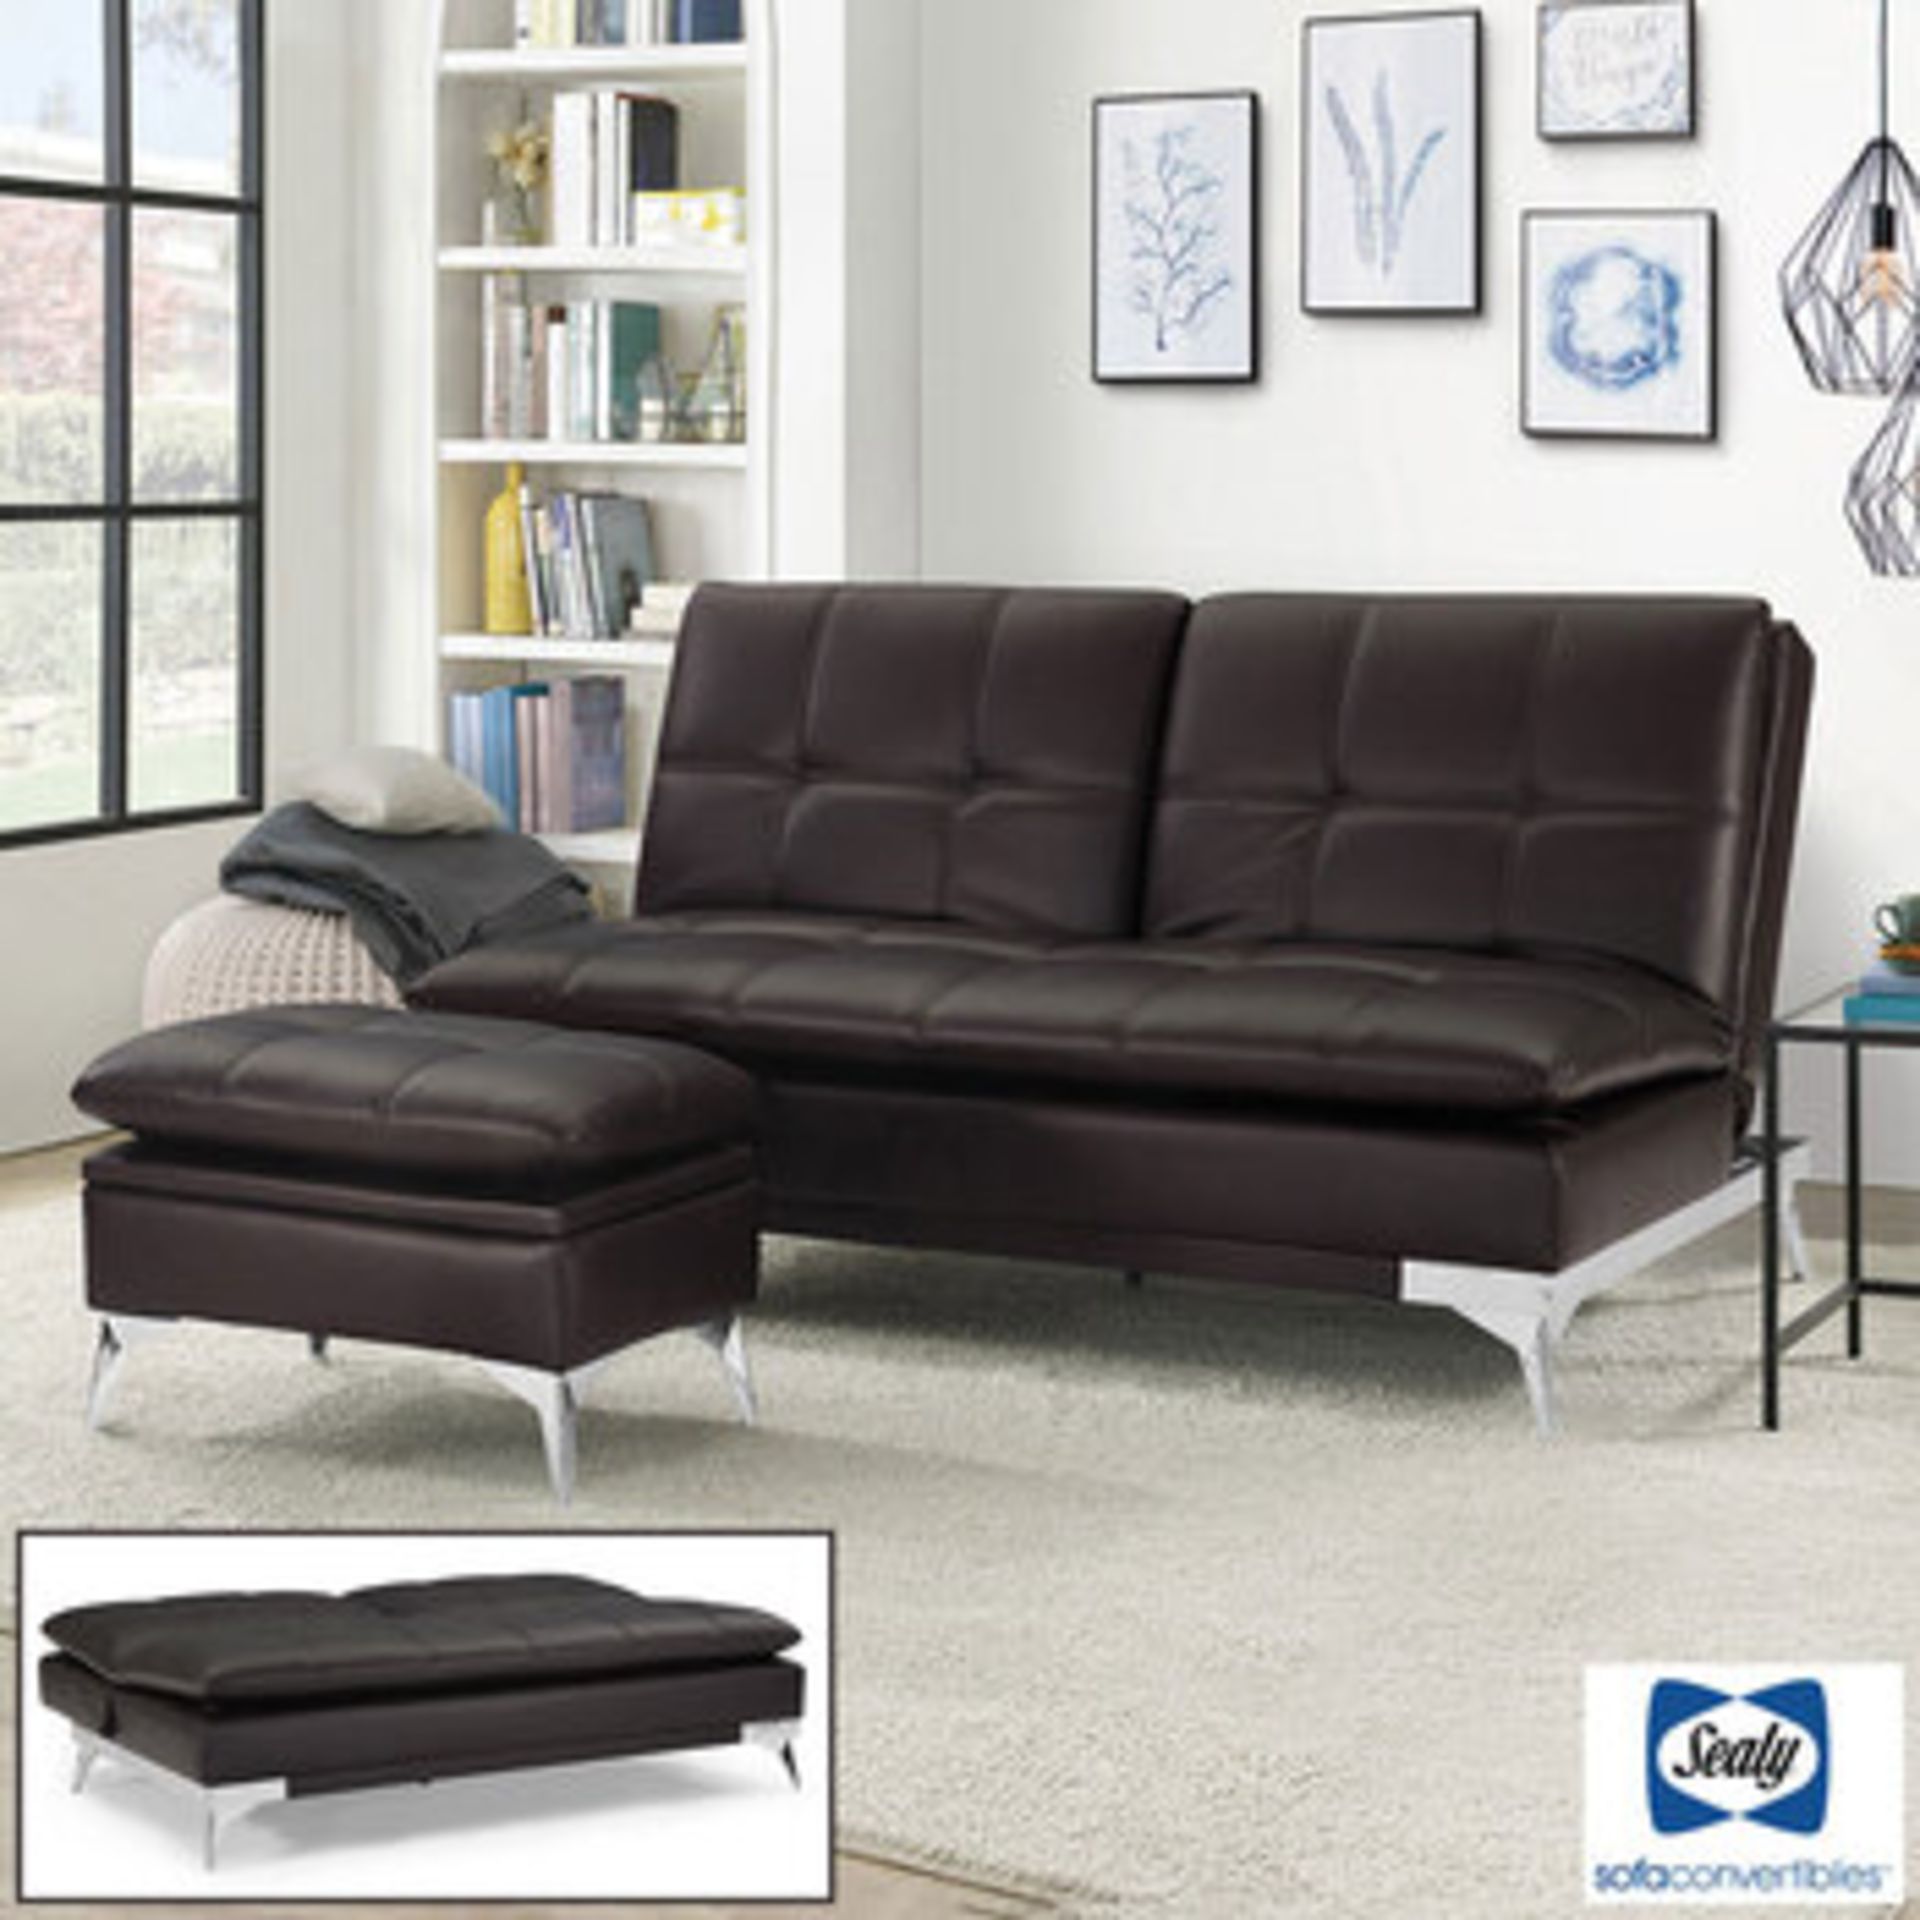 1 SEALY BROWN LEATHER CONVERTIBLE EUROLOUNGER WITH STORAGE OTTOMAN RRP Â£599